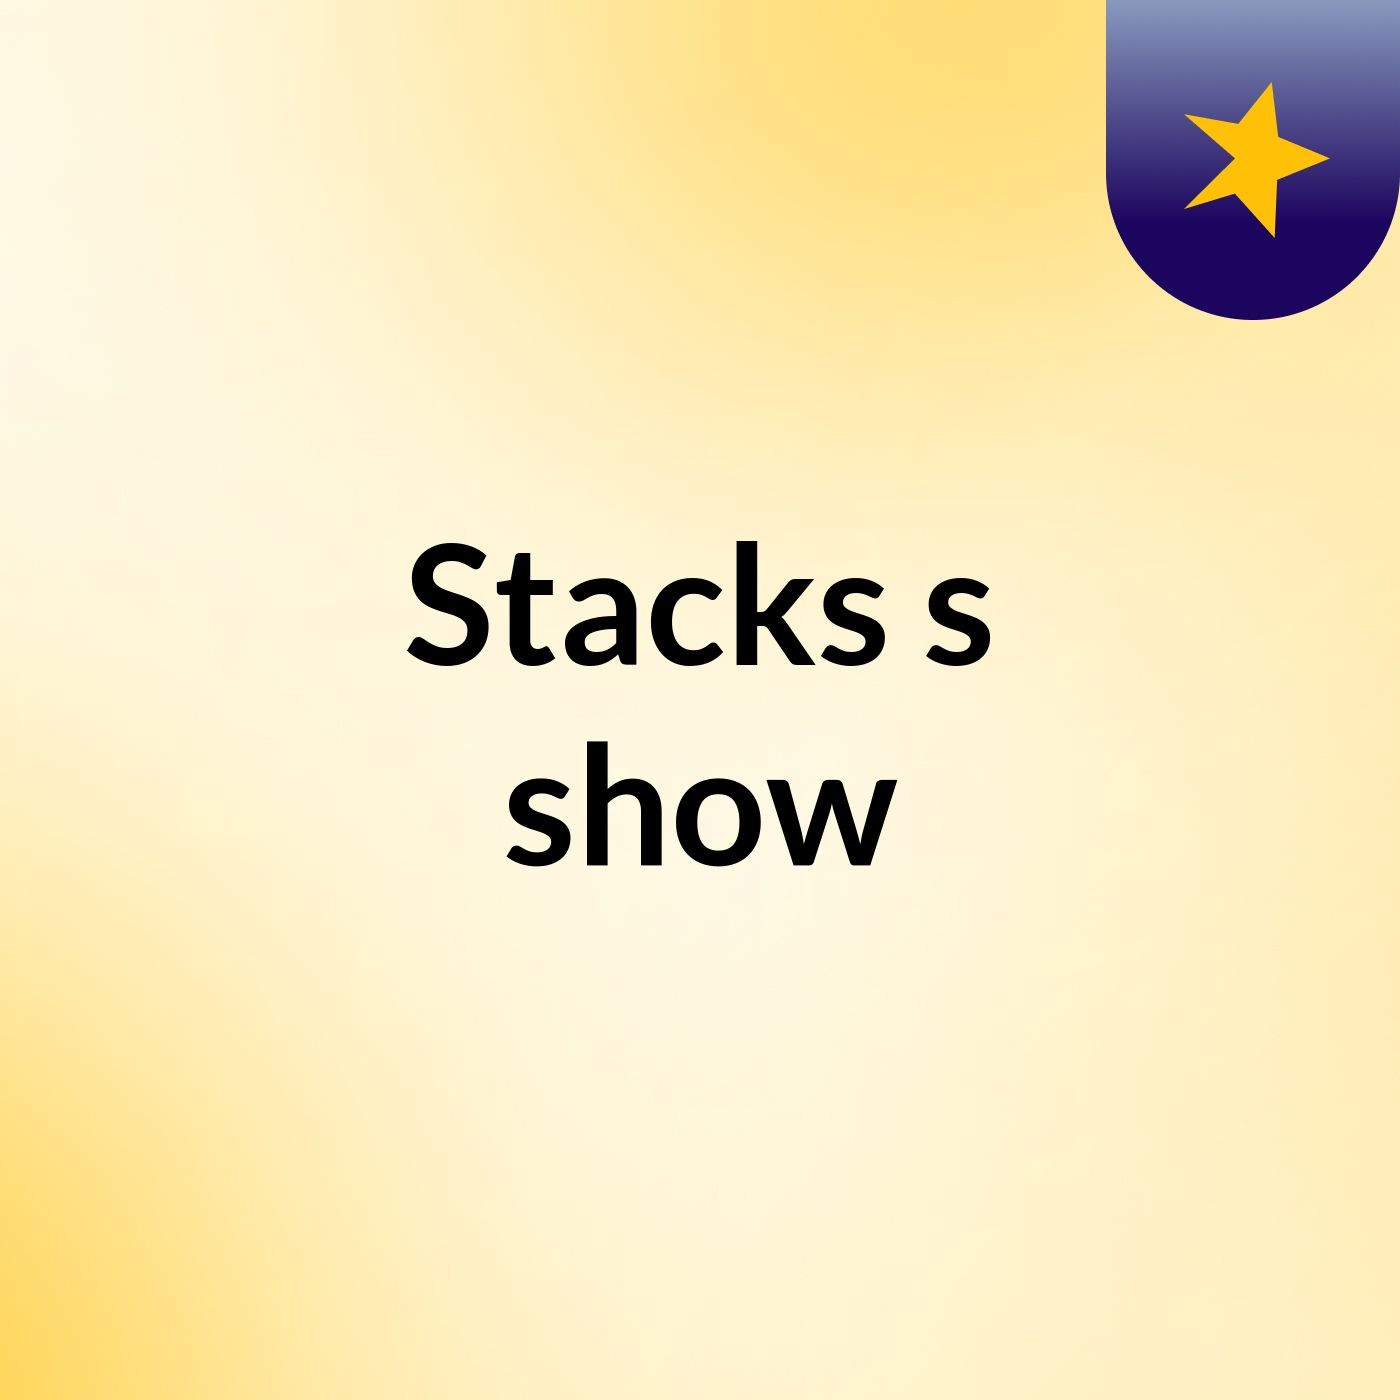 Stacks's show